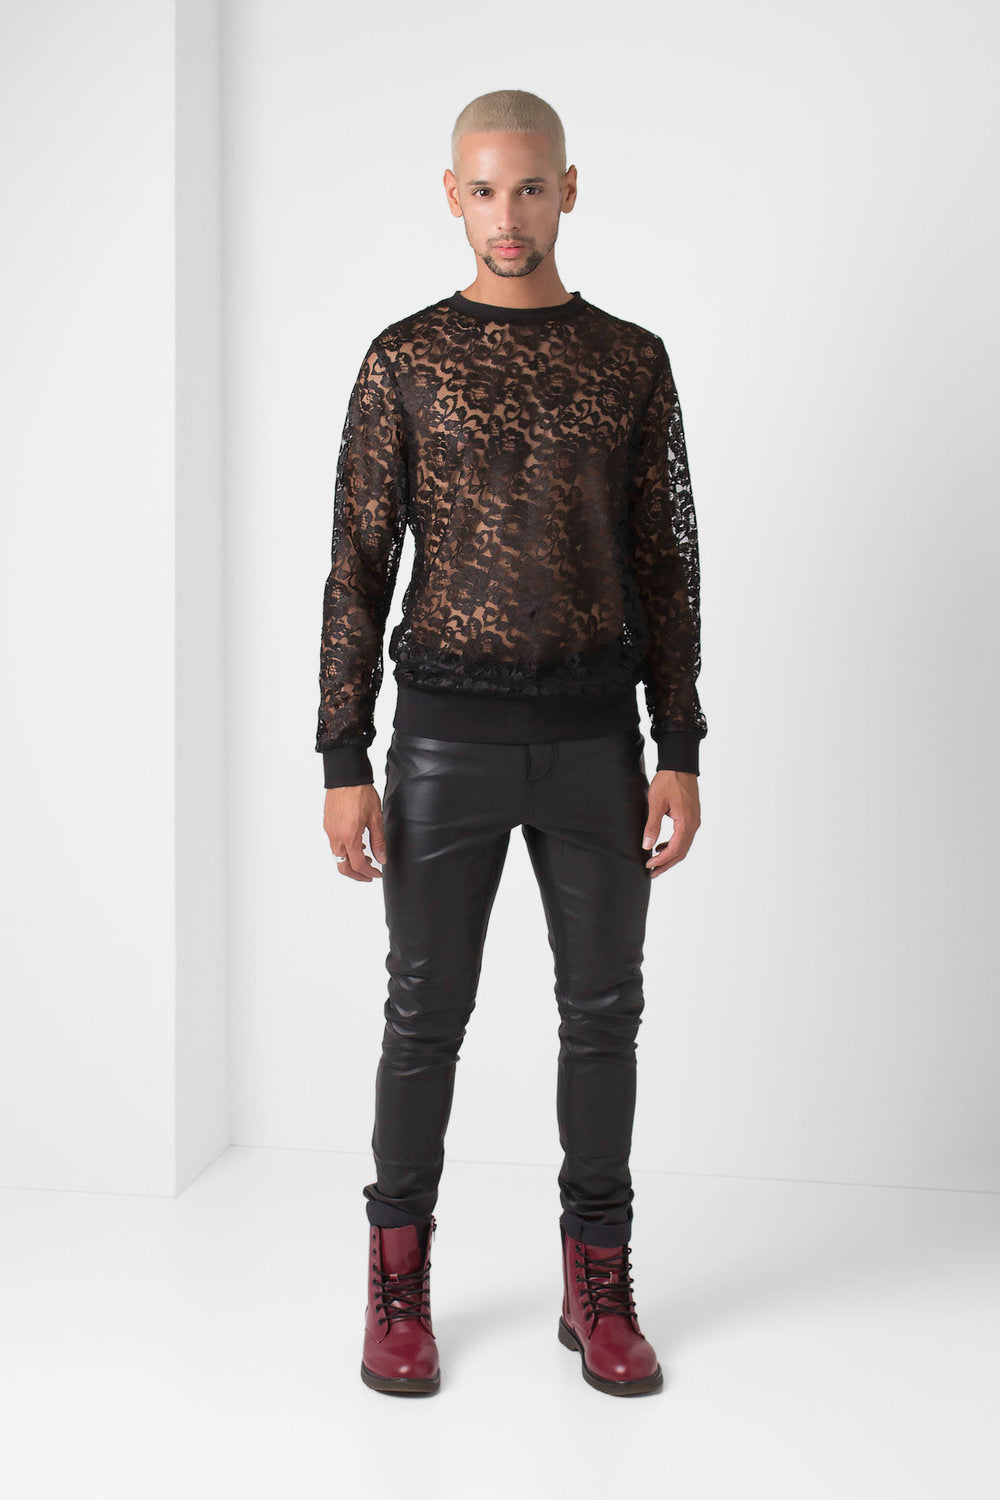 Black Lace Pullover - pacorogiene